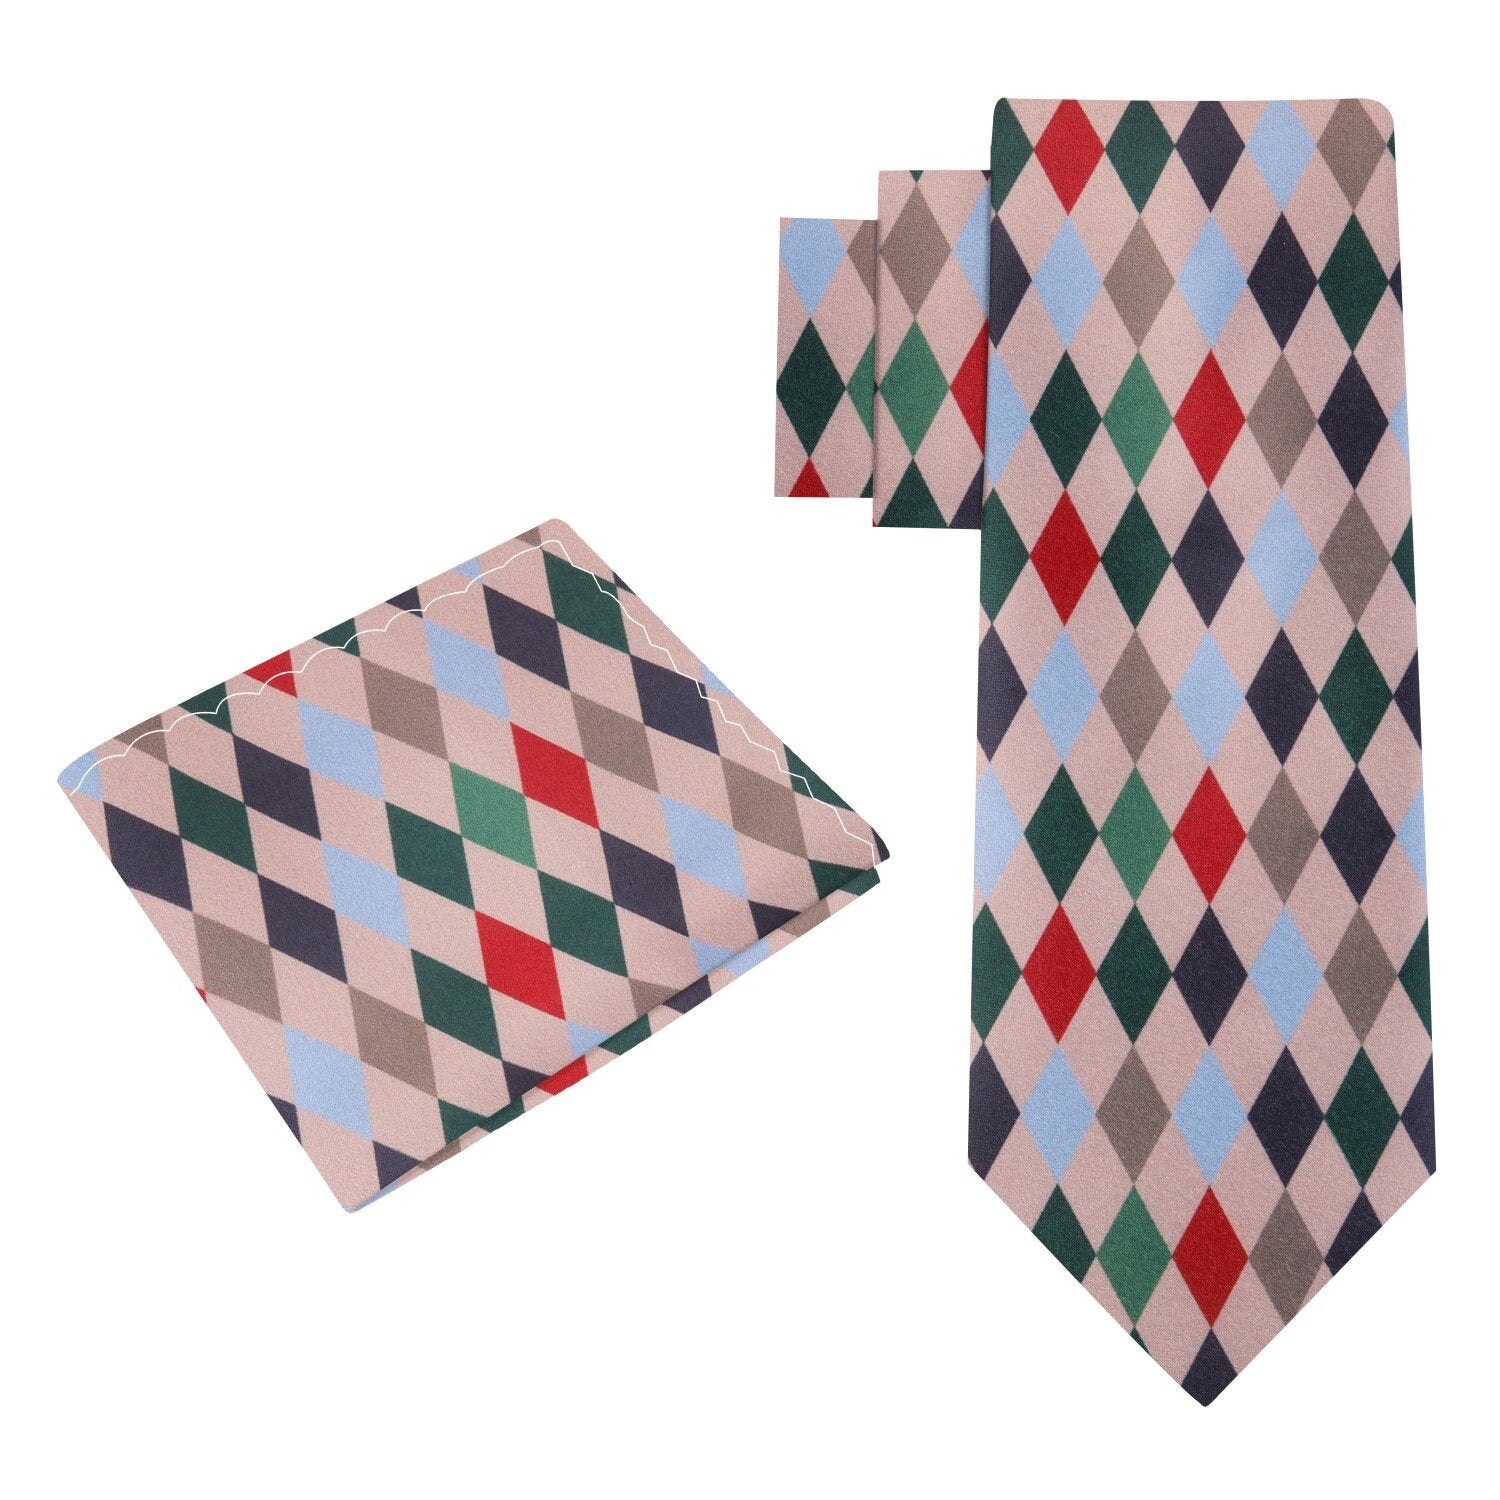 Alt View: Red, Green, Brown, Blue Harlequin Diamonds Tie and Pocket Square